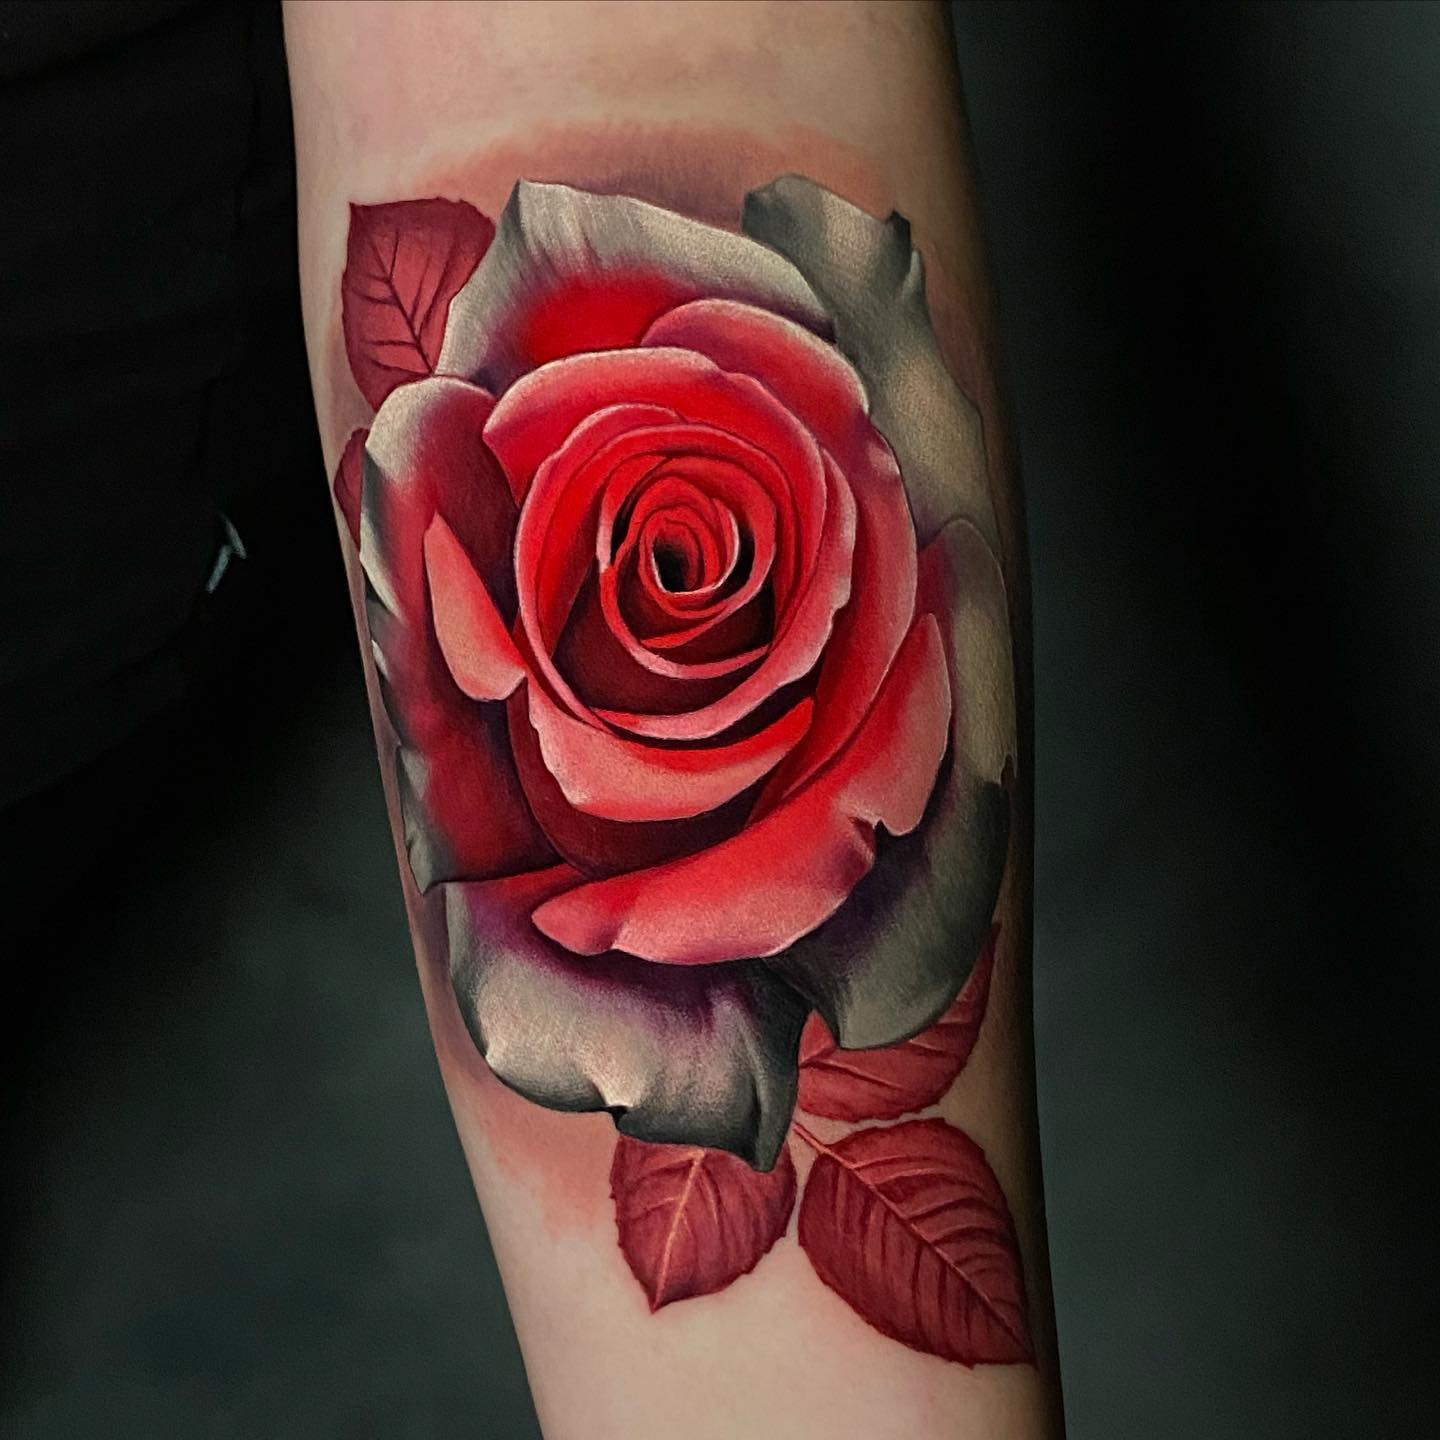 vivid red rose tattoo with red leaves on forearm